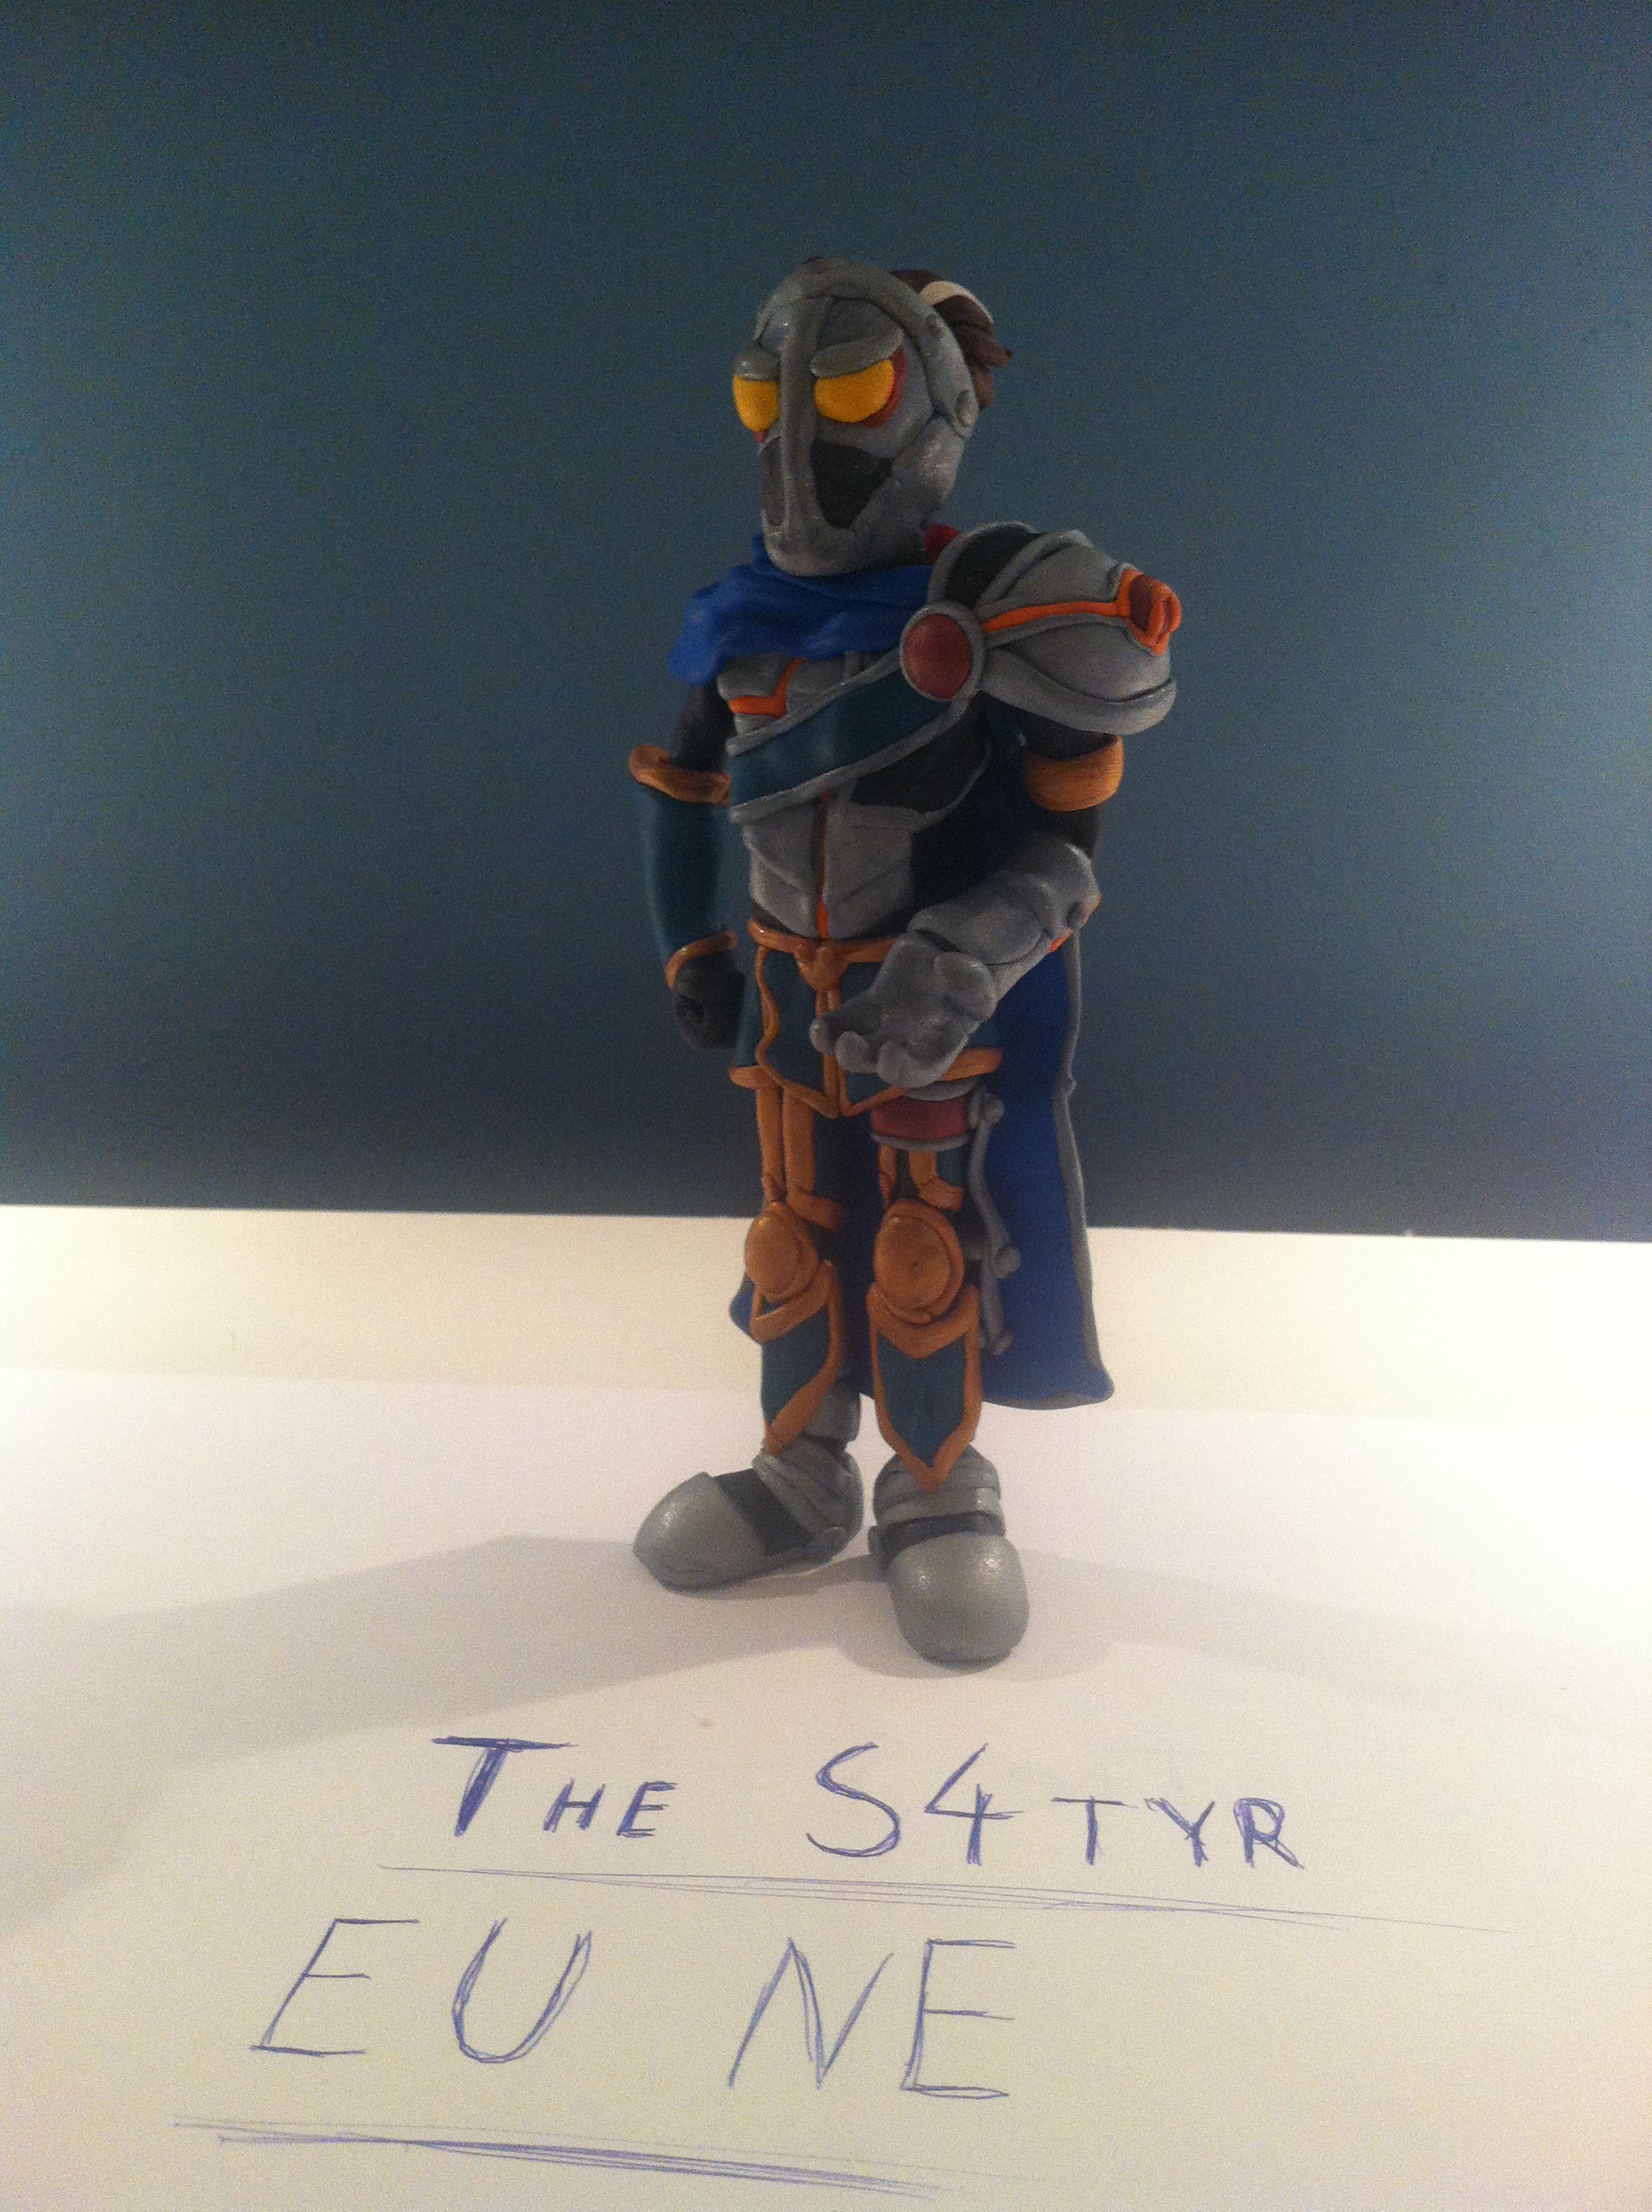 LoL] Viktor figurine by TheS4tyr on DeviantArt